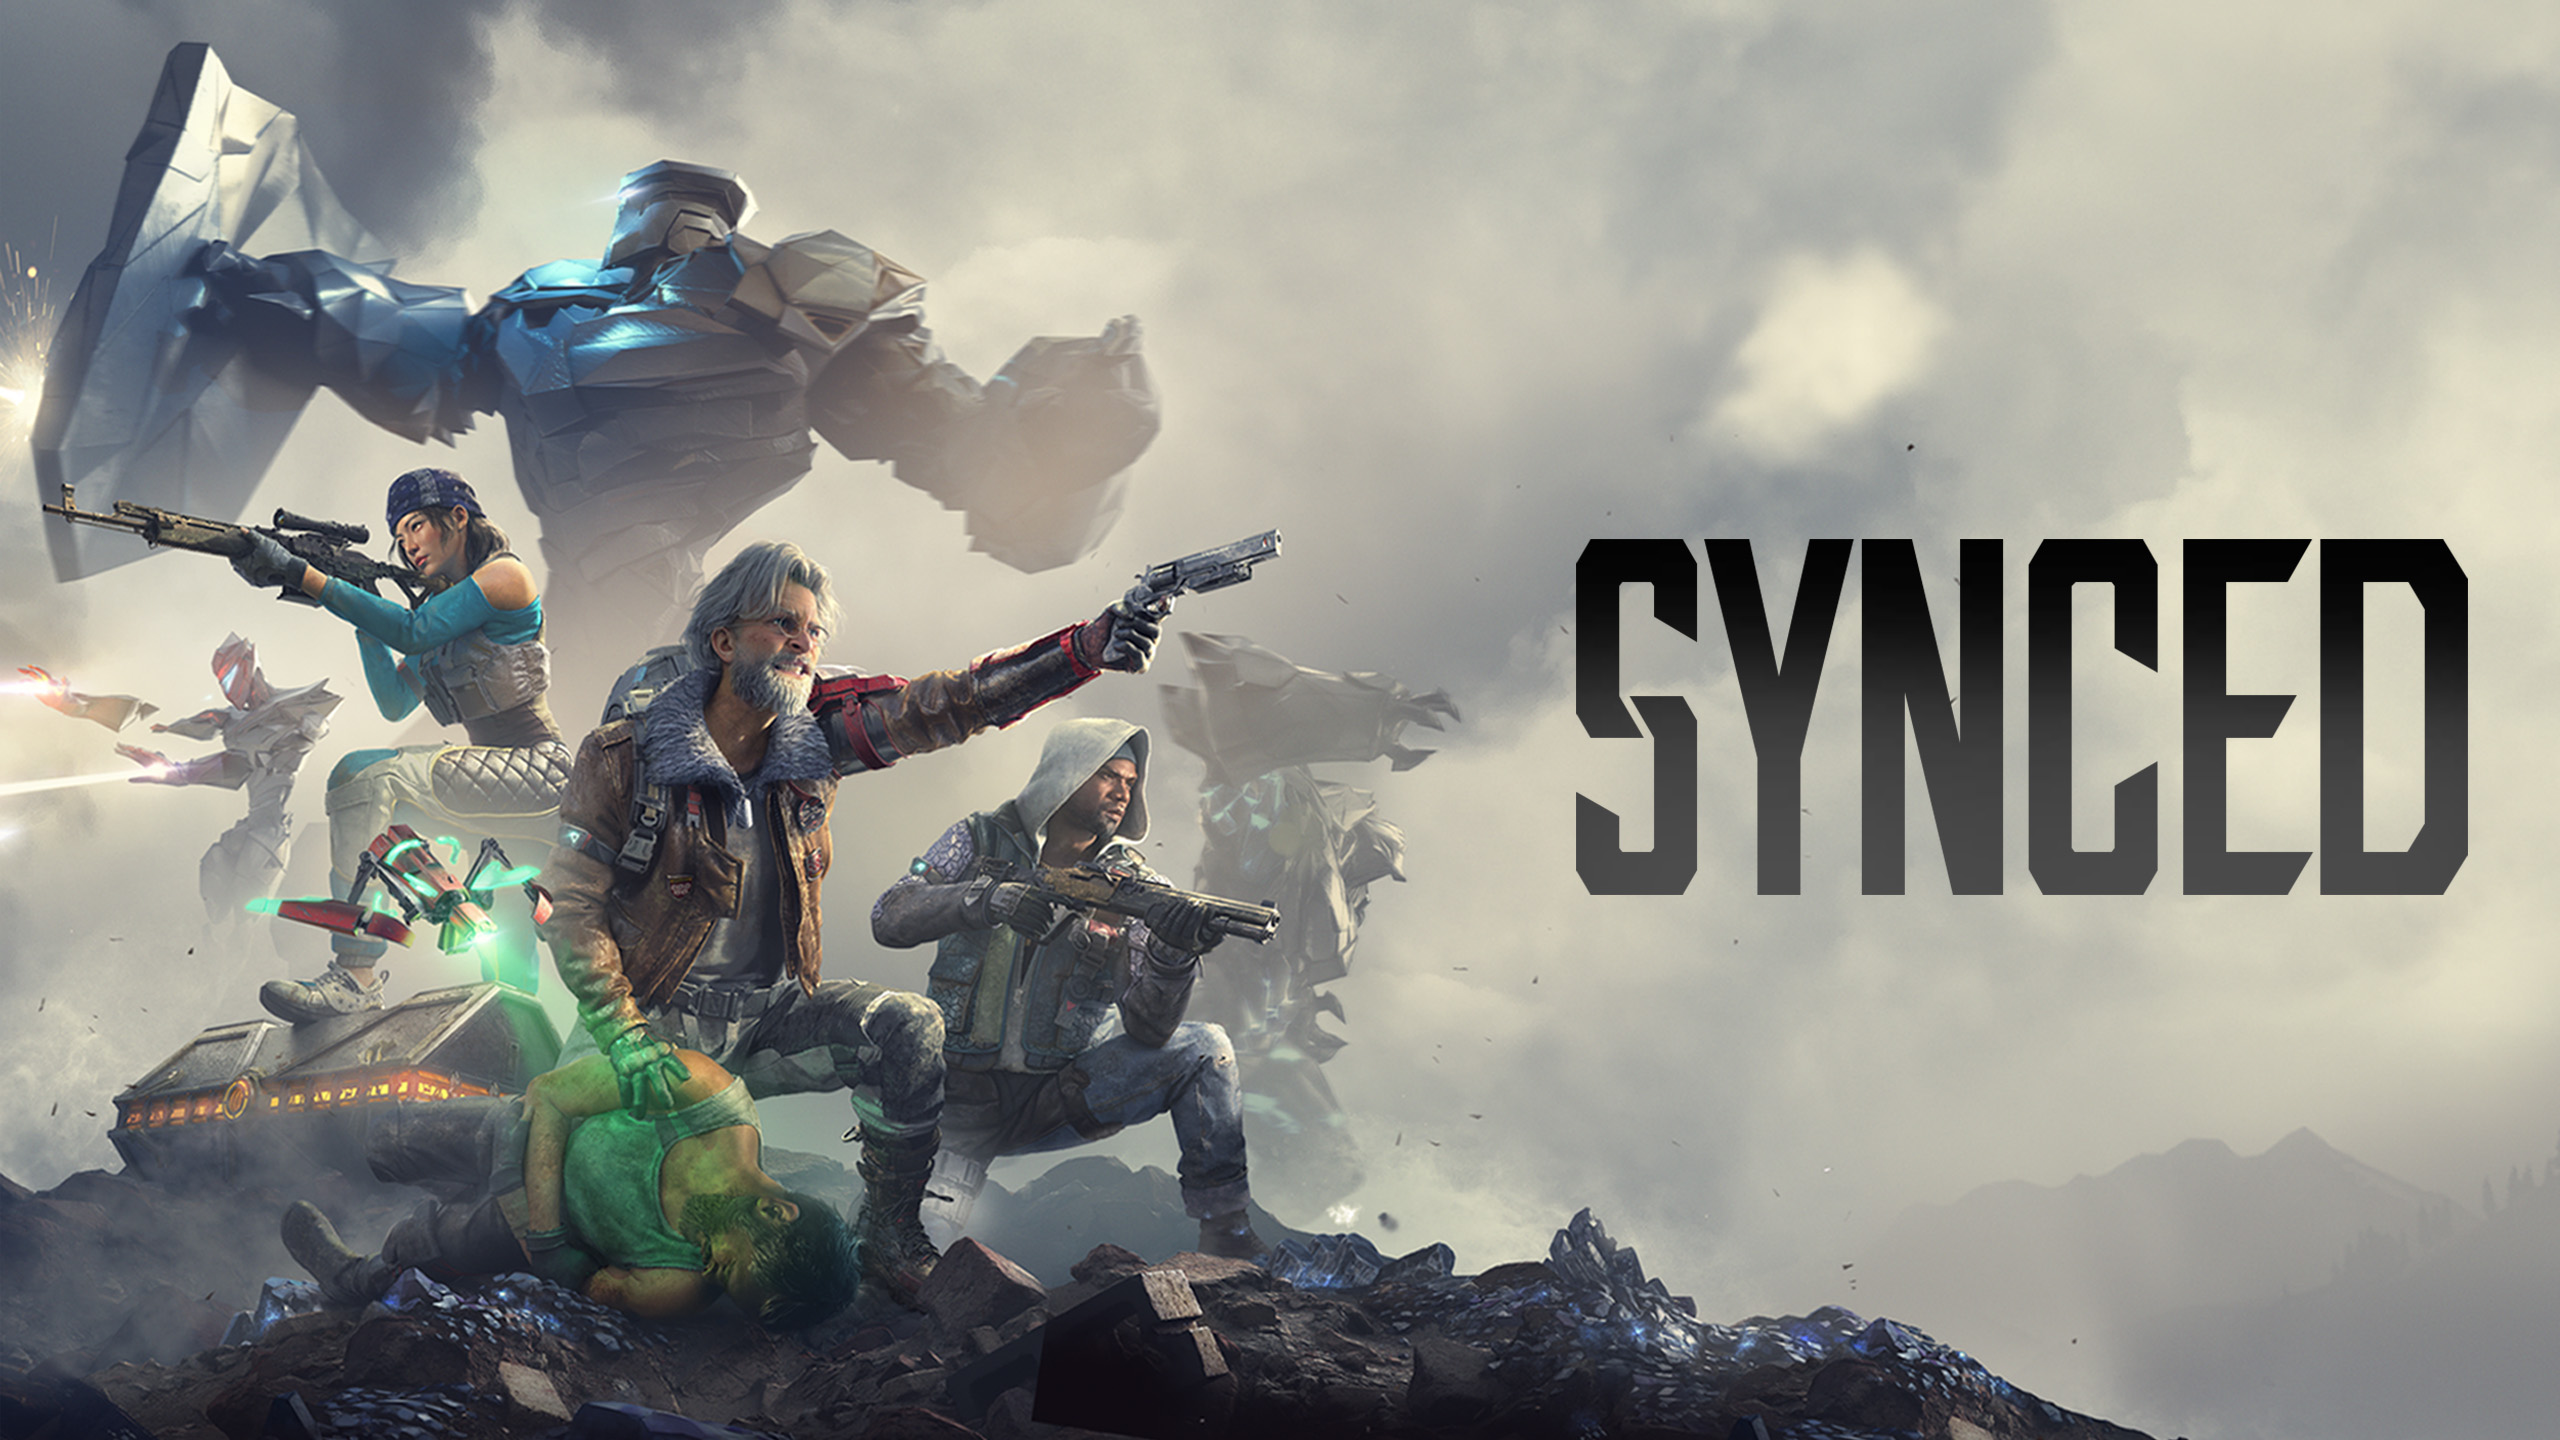 SYNCED Review- A Fun Free-to-Play Shooter with a Lackluster Grind